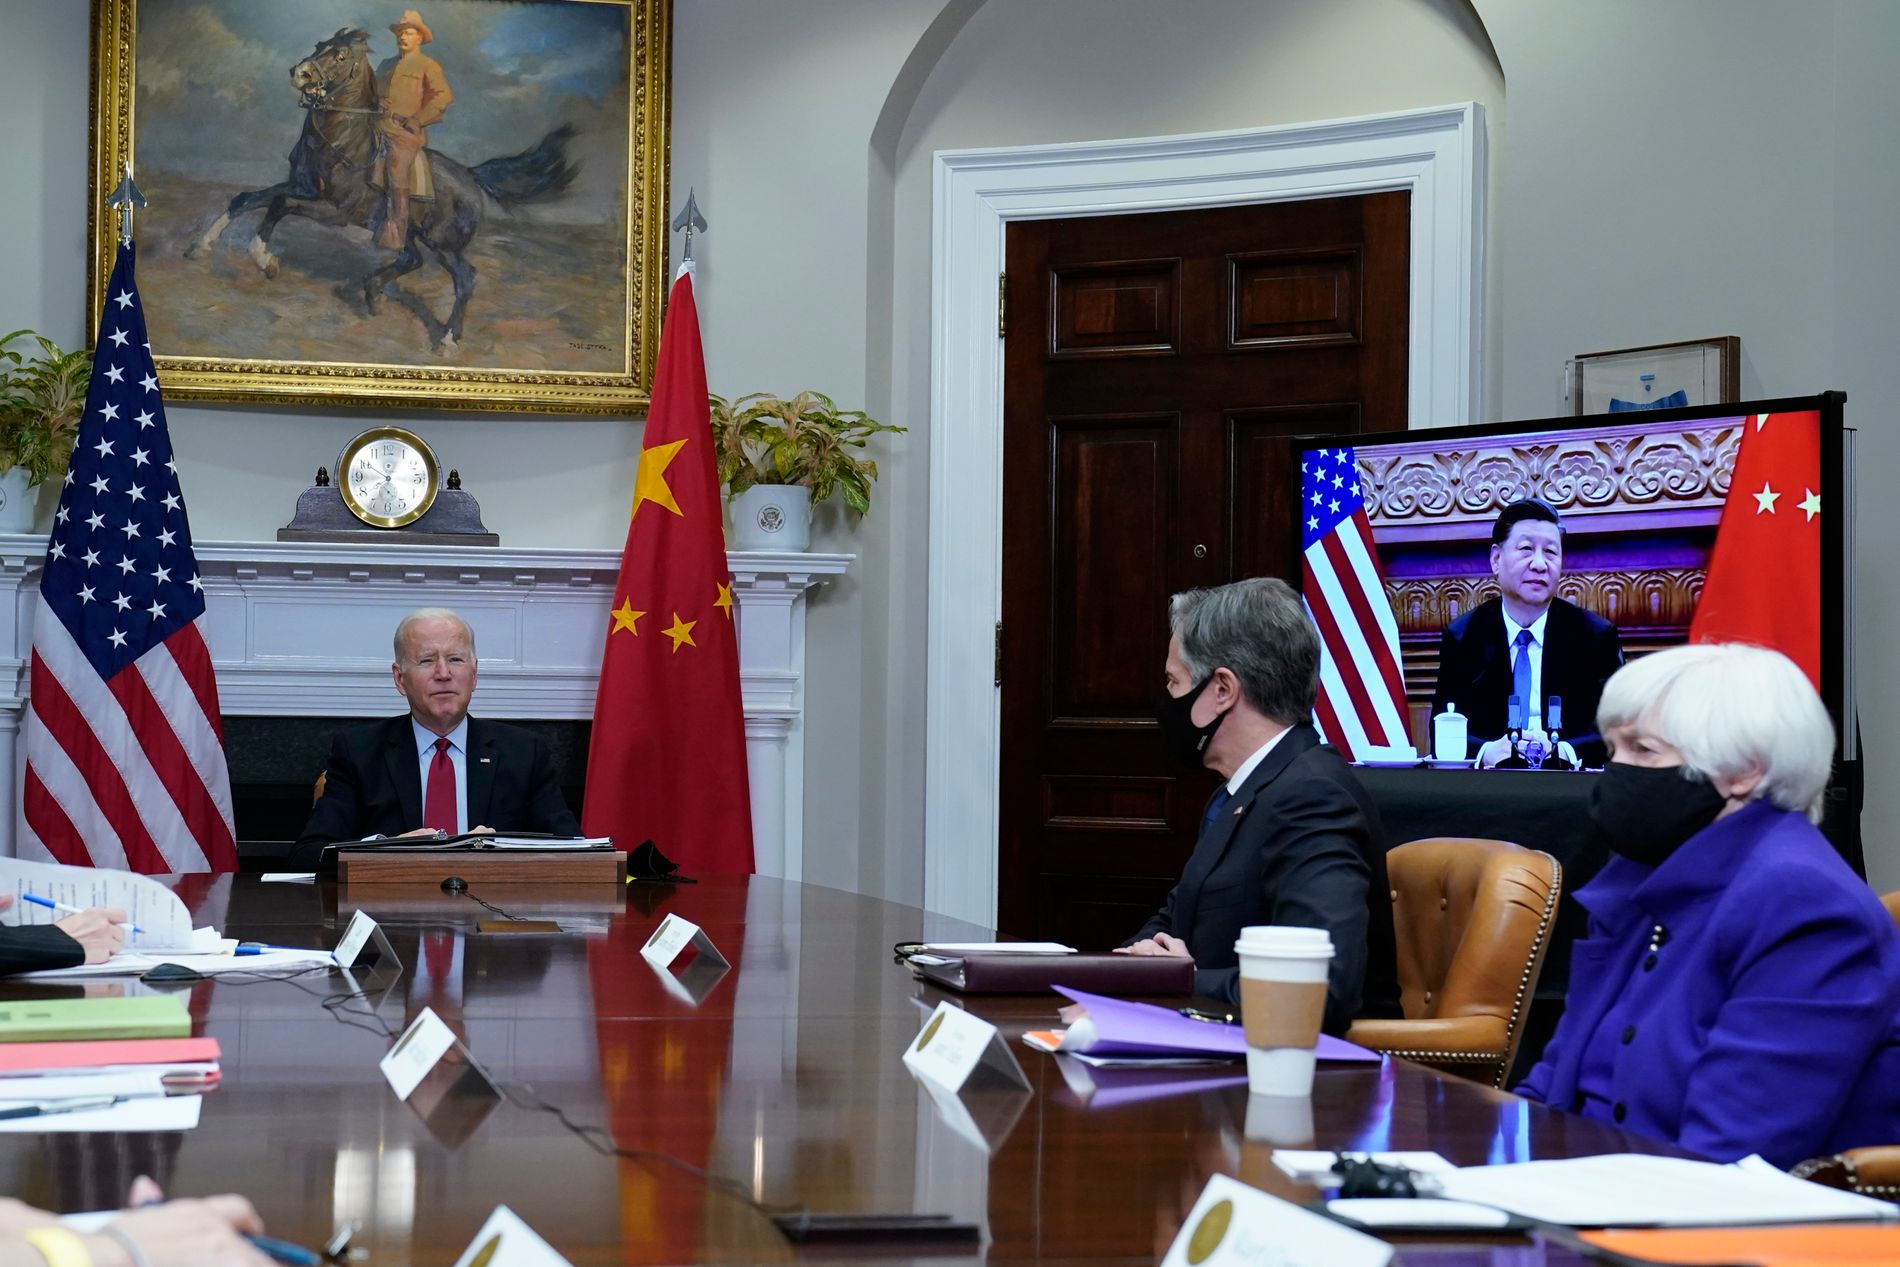 Taiwan and human rights were the subject between Biden and Xi - VG